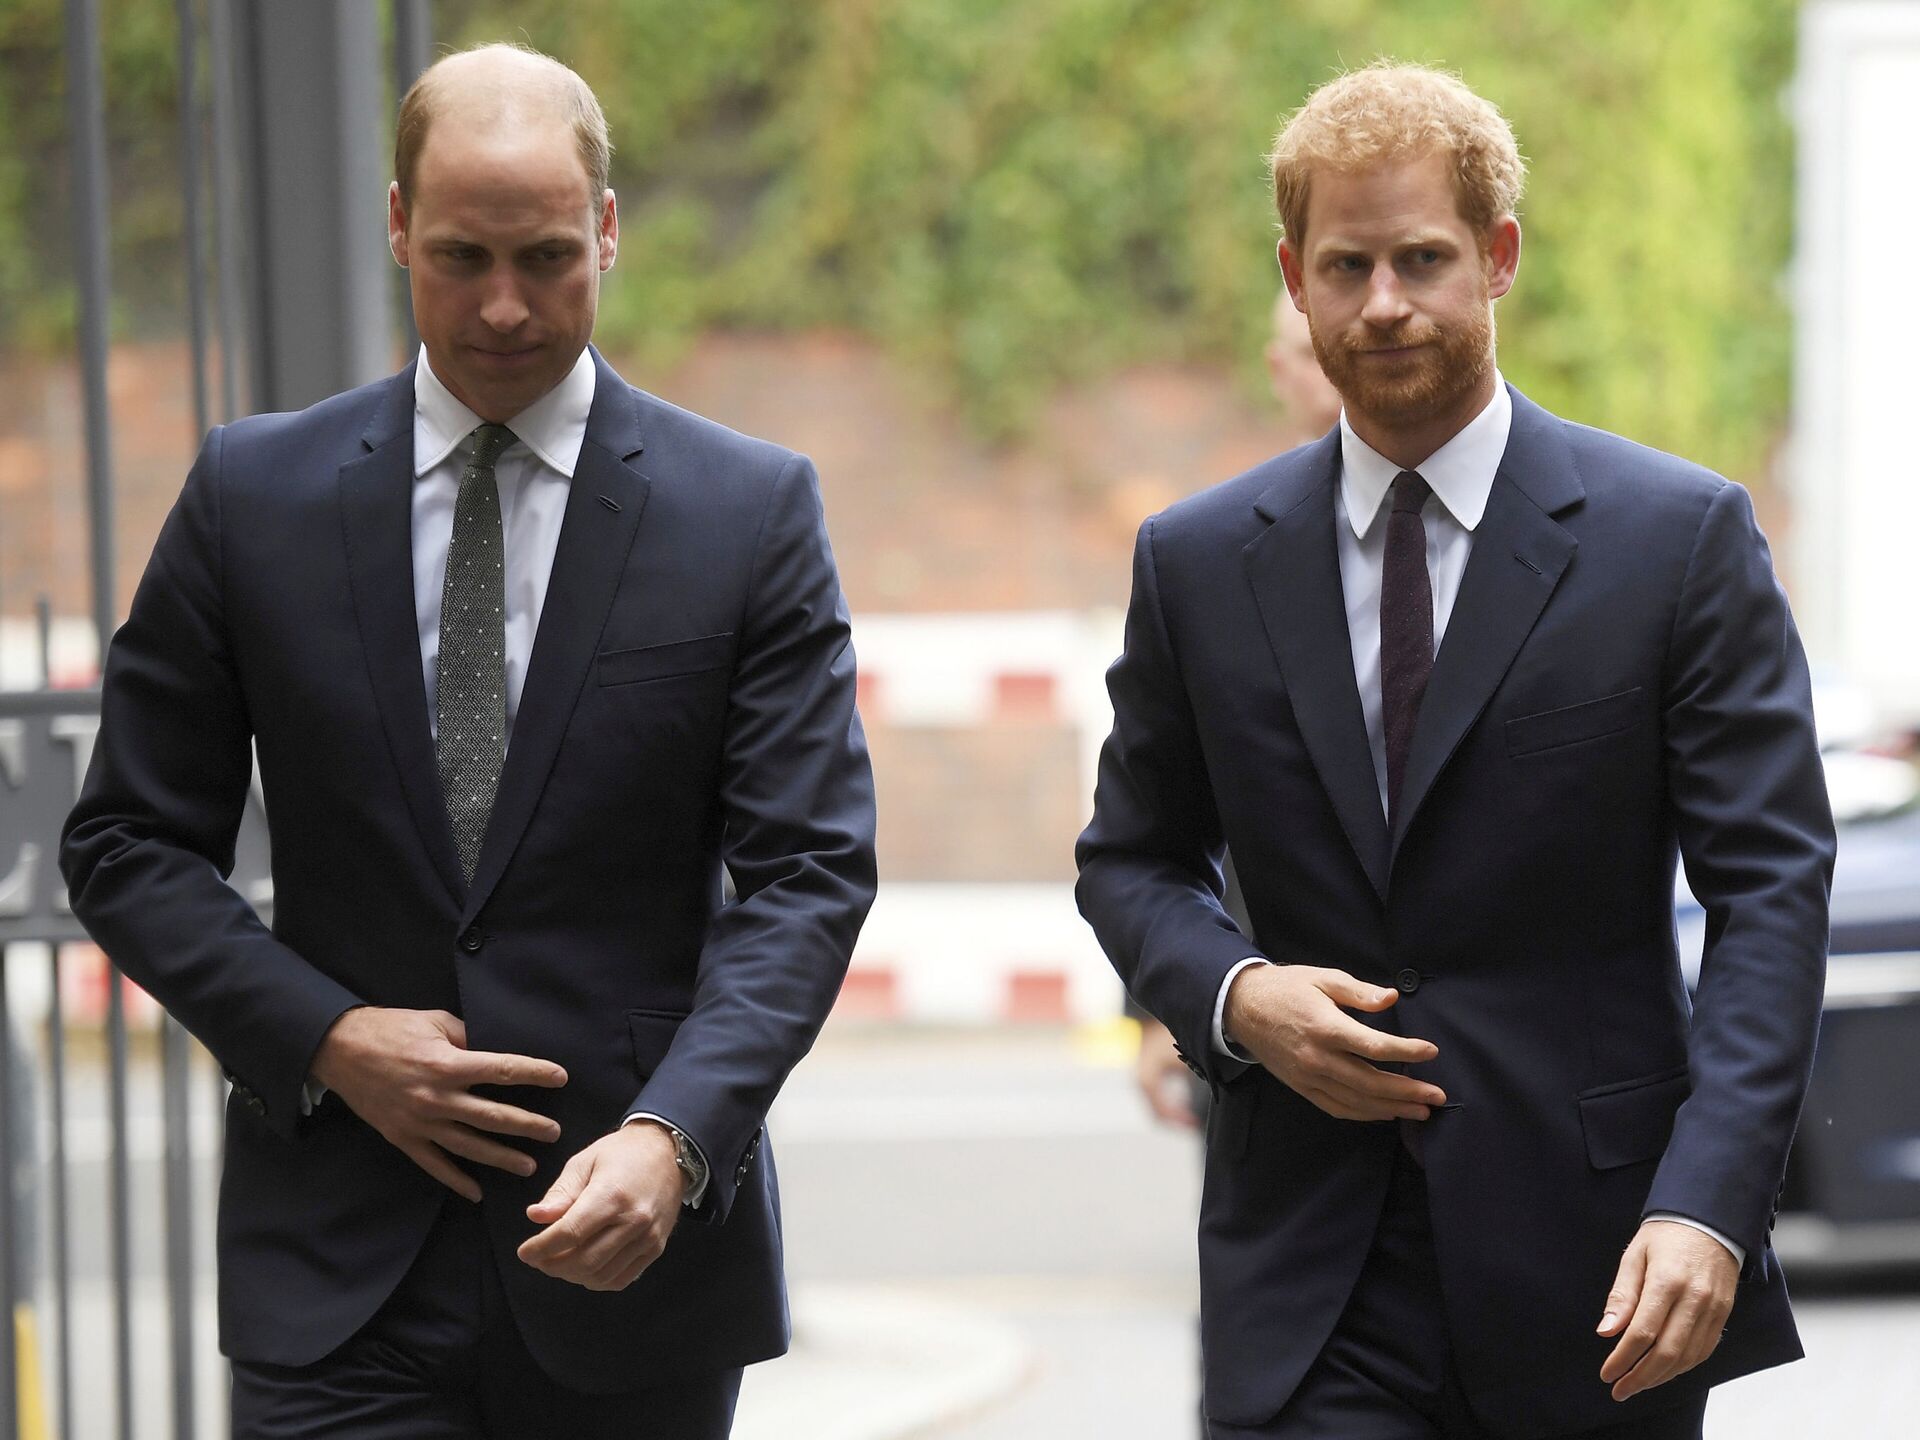 Prince Harry Will Be Rocking the Bald Look By 50, is Losing Hair Faster Since Megxit, Claims Doctor - Sputnik International, 1920, 16.06.2021